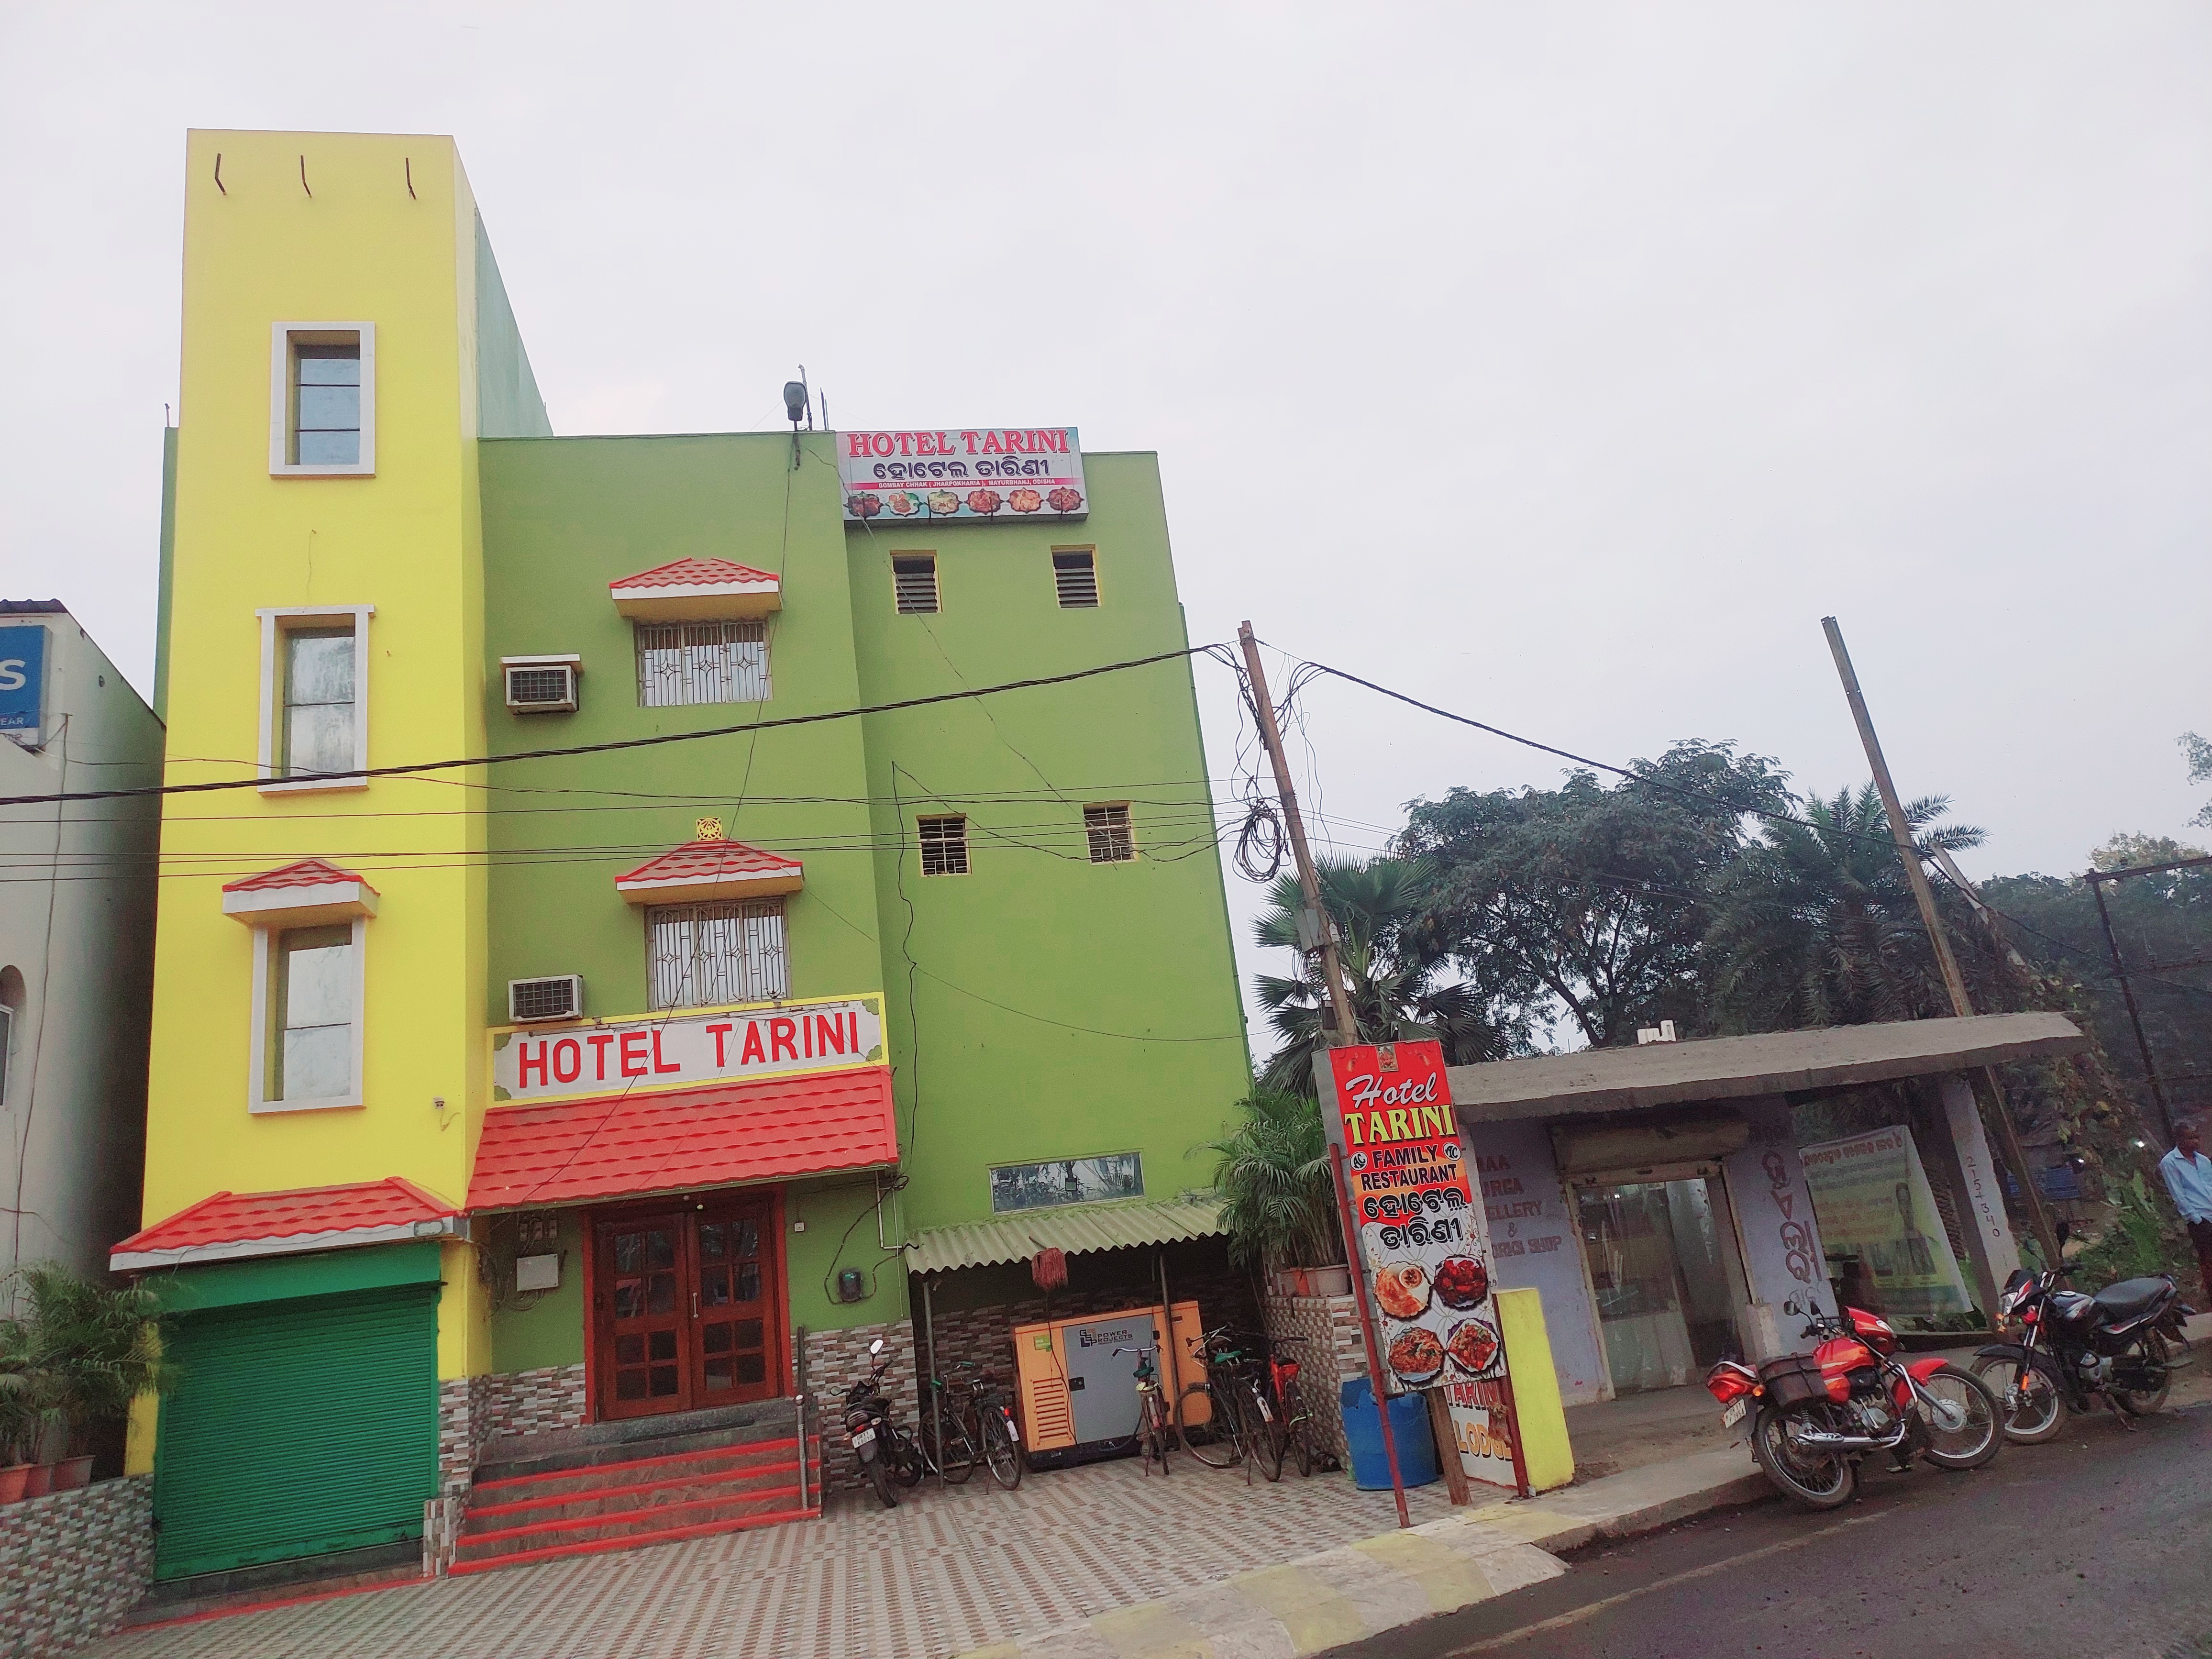 Welcome to Hotel Tarini Lodge & Restaurant. Enjoy Modern Hotel Rooms and Services